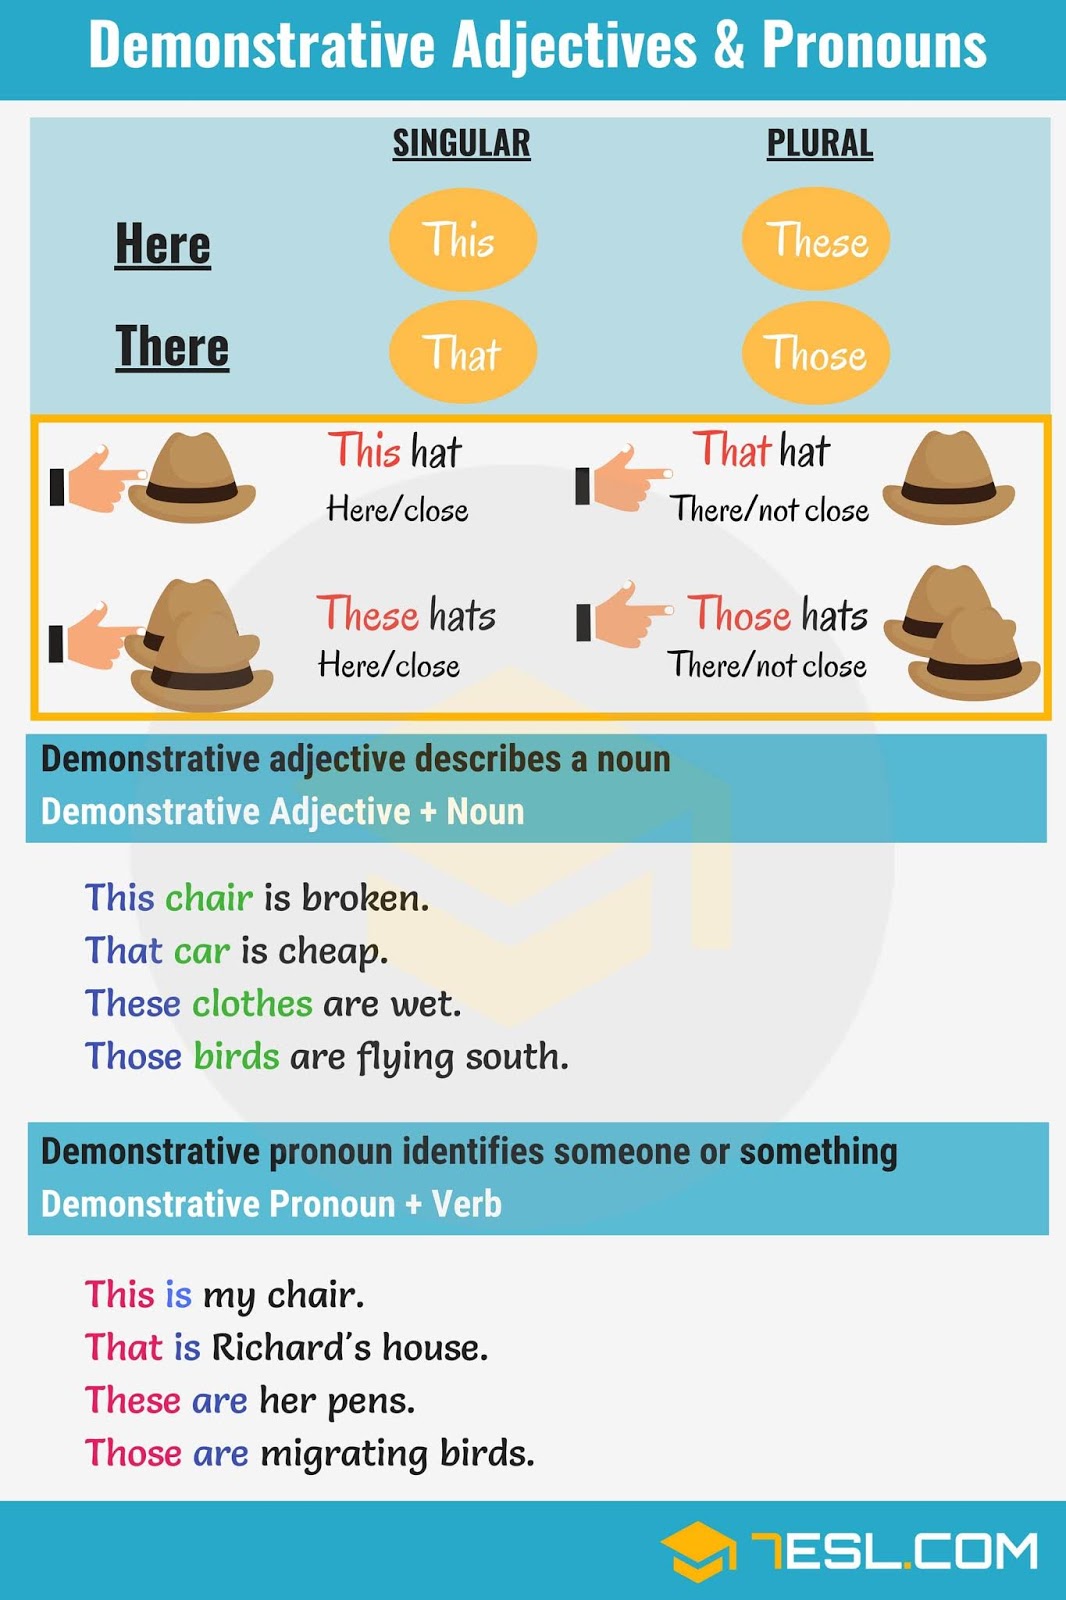 English Is FUNtastic Demonstrative Adjectives And Pronouns Infographic